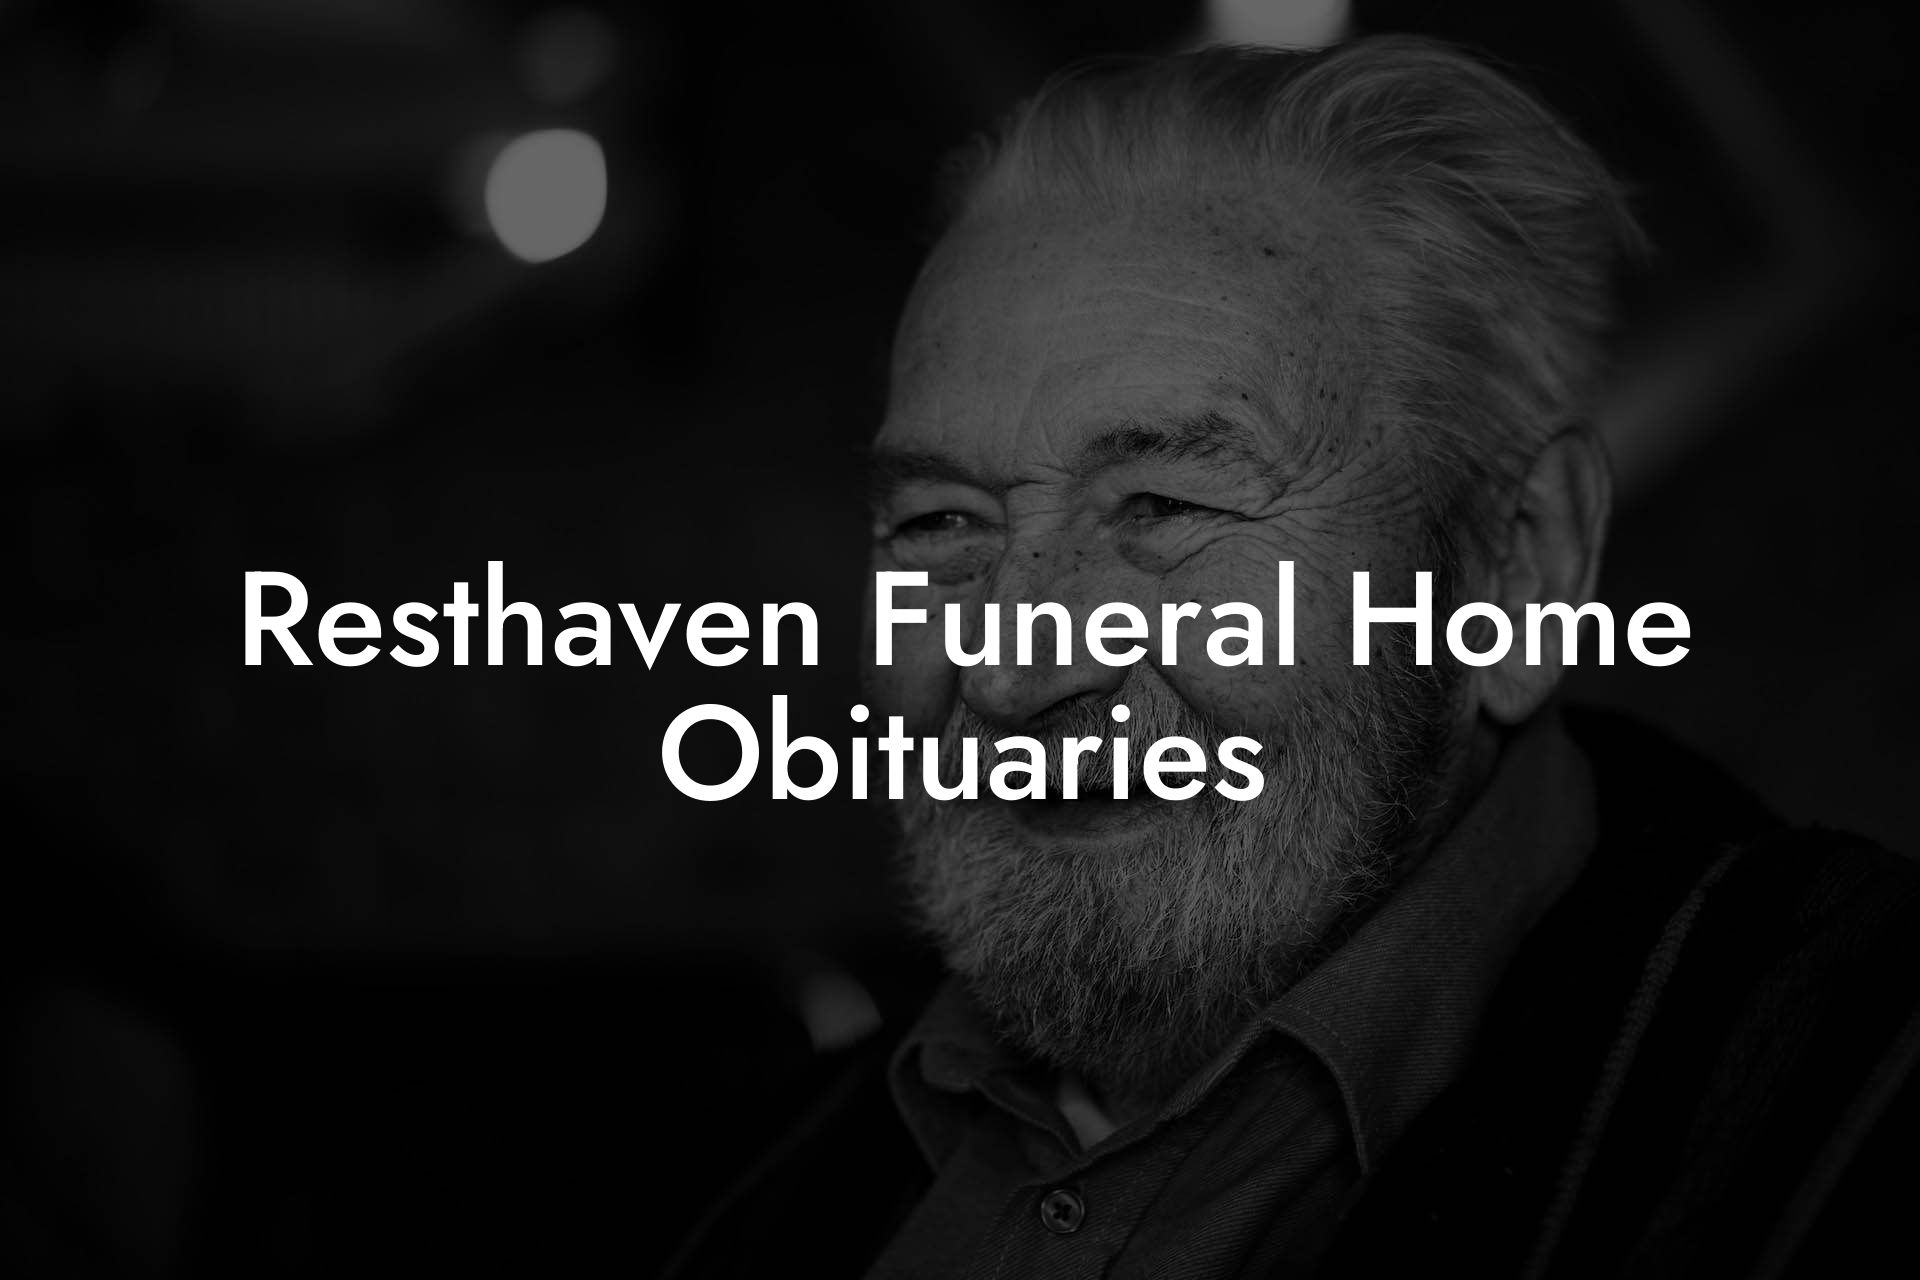 Resthaven Funeral Home Obituaries